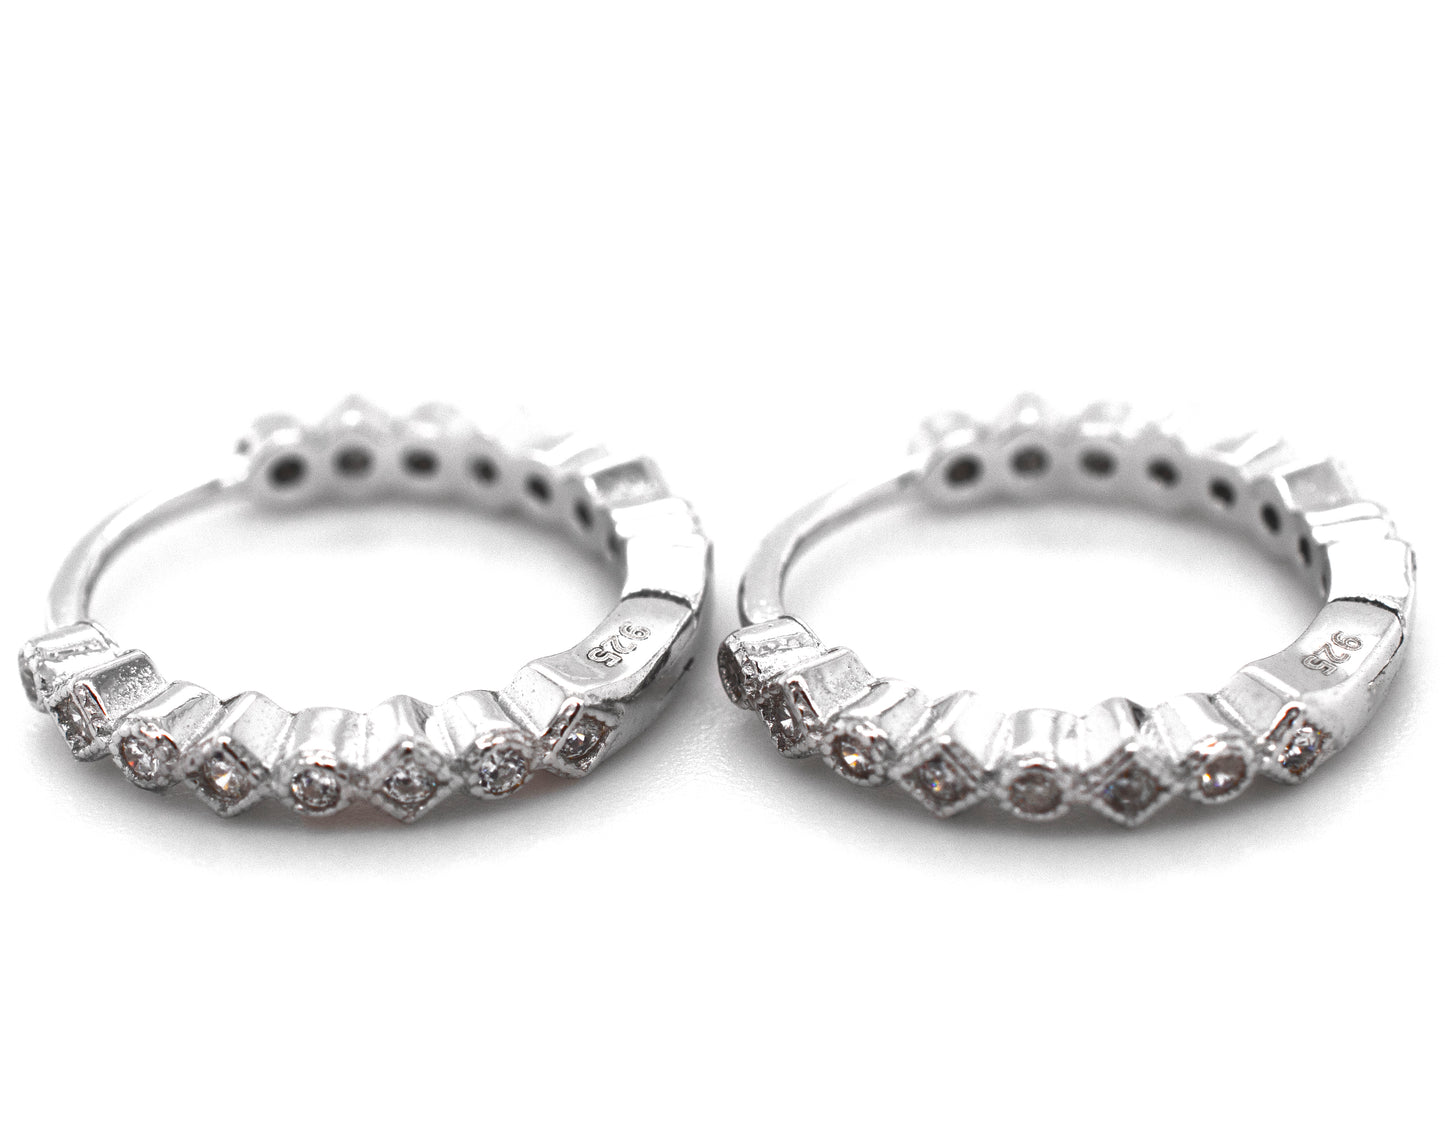 A pair of Fashionable Geometric CZ Hoops by Super Silver with diamonds.